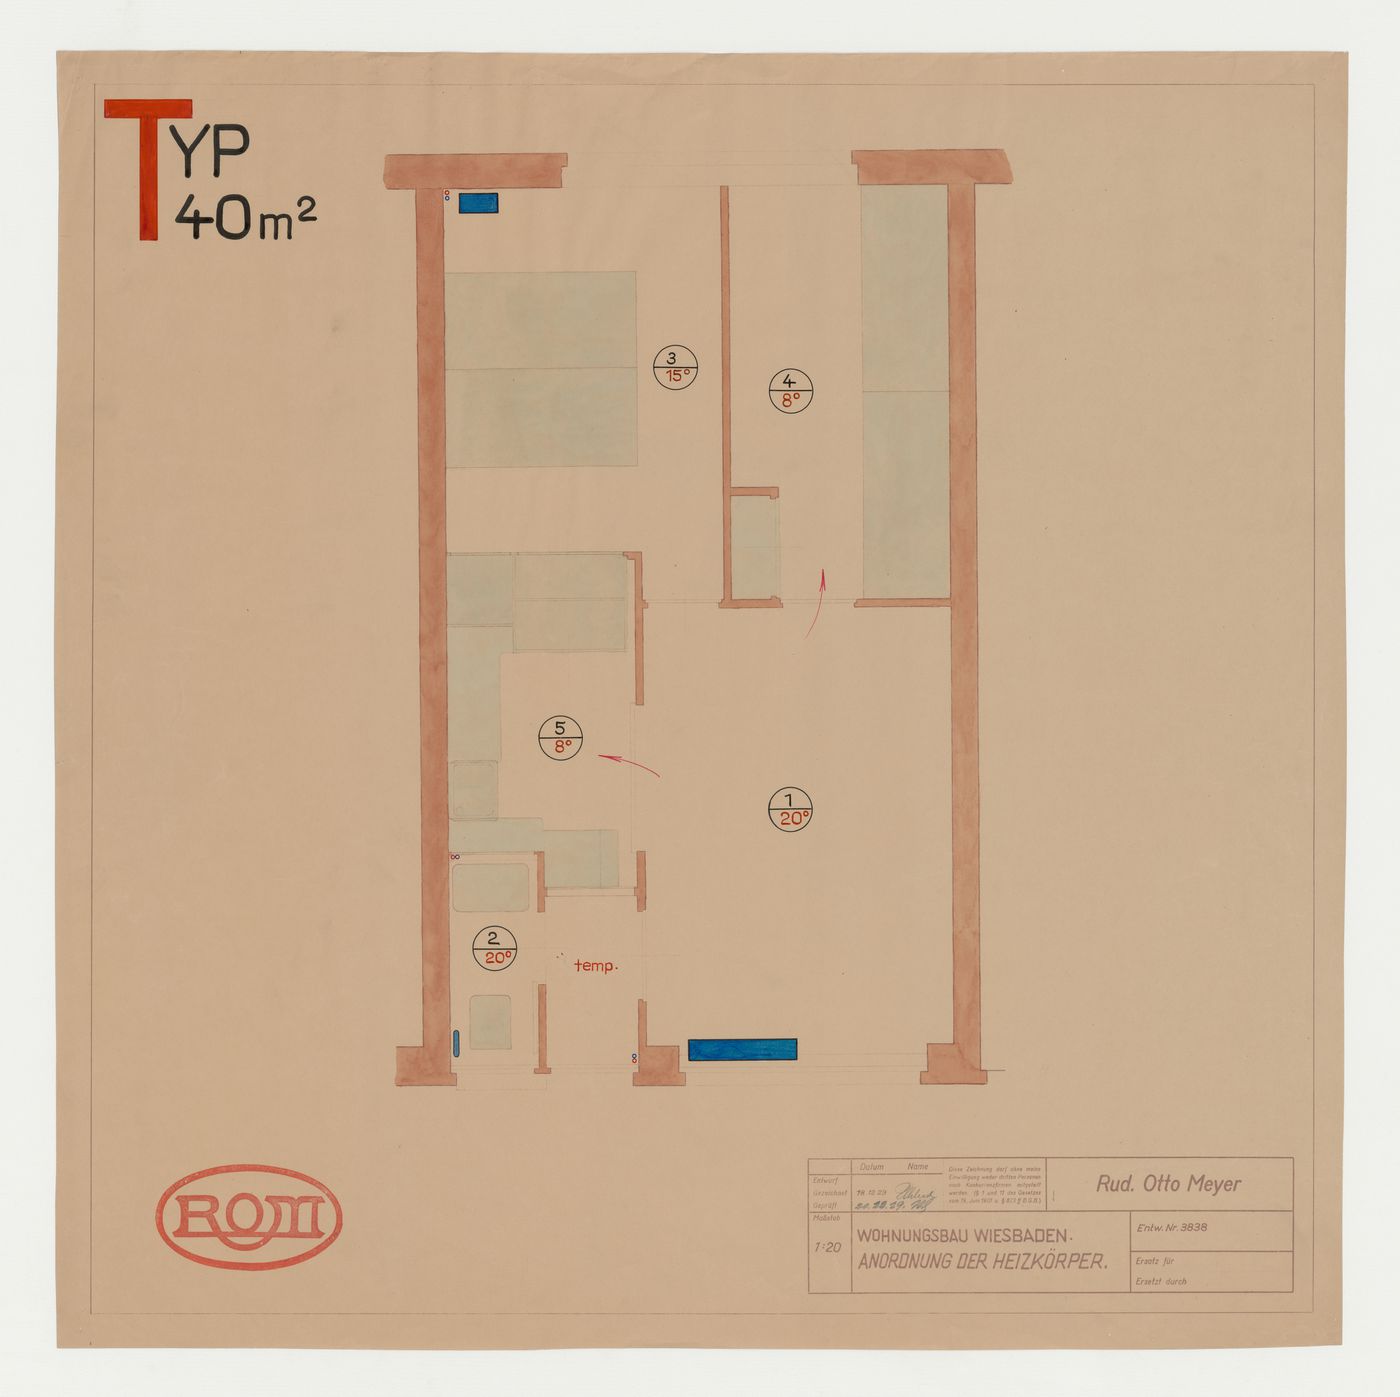 Plan for a housing unit showing radiator heating system, Wiesbaden, Germany